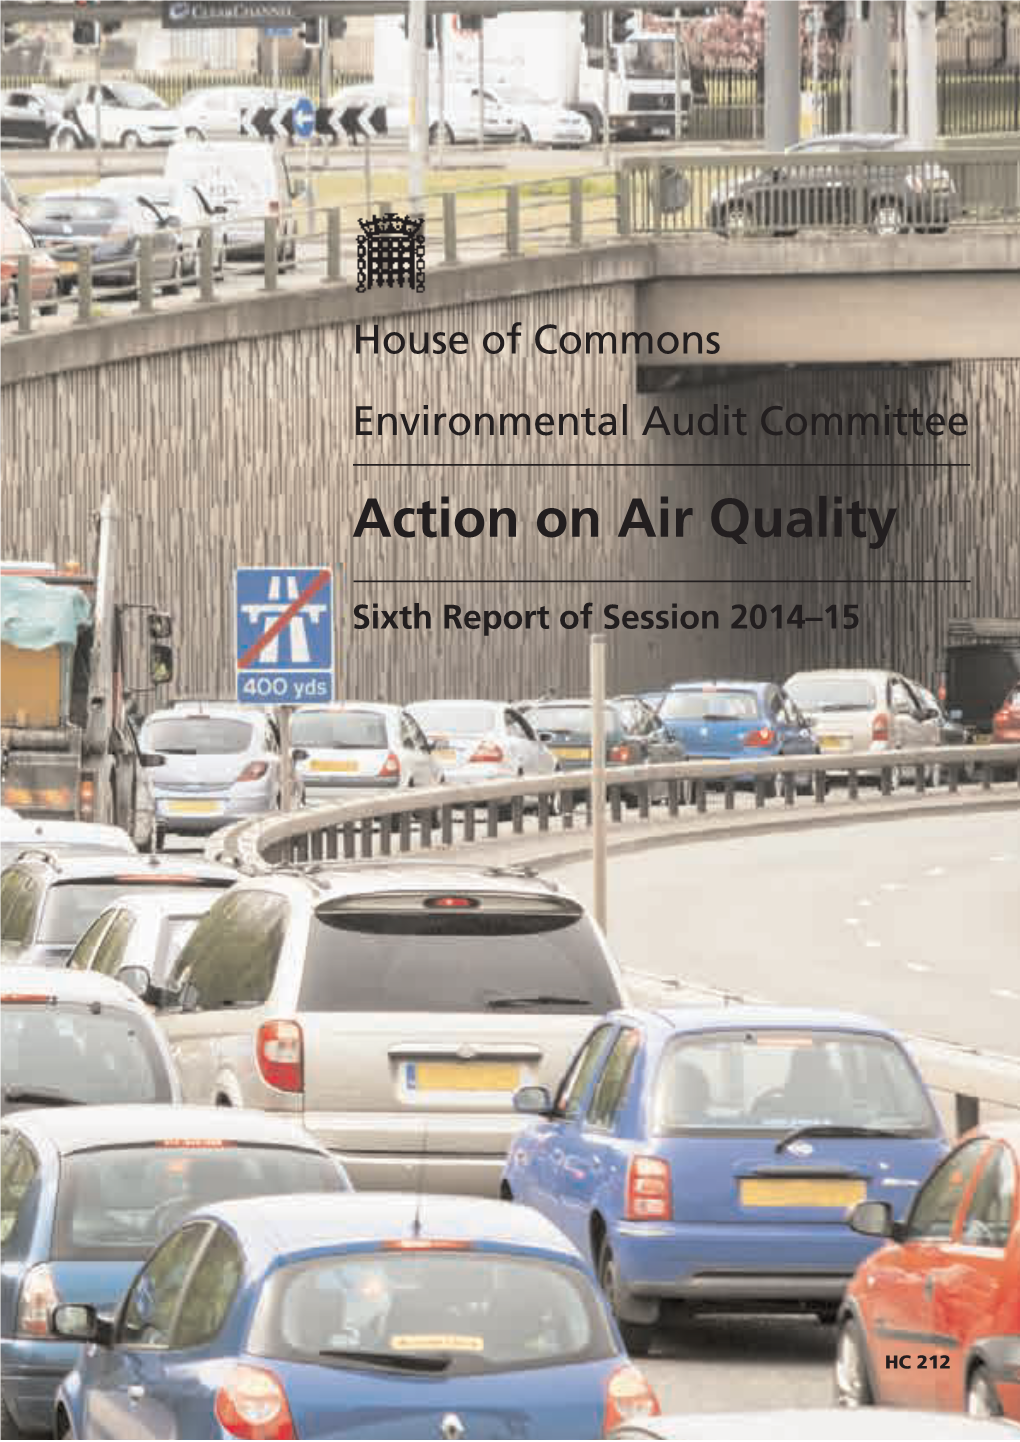 Action on Air Quality Be Reported to the House for Publication on the Internet